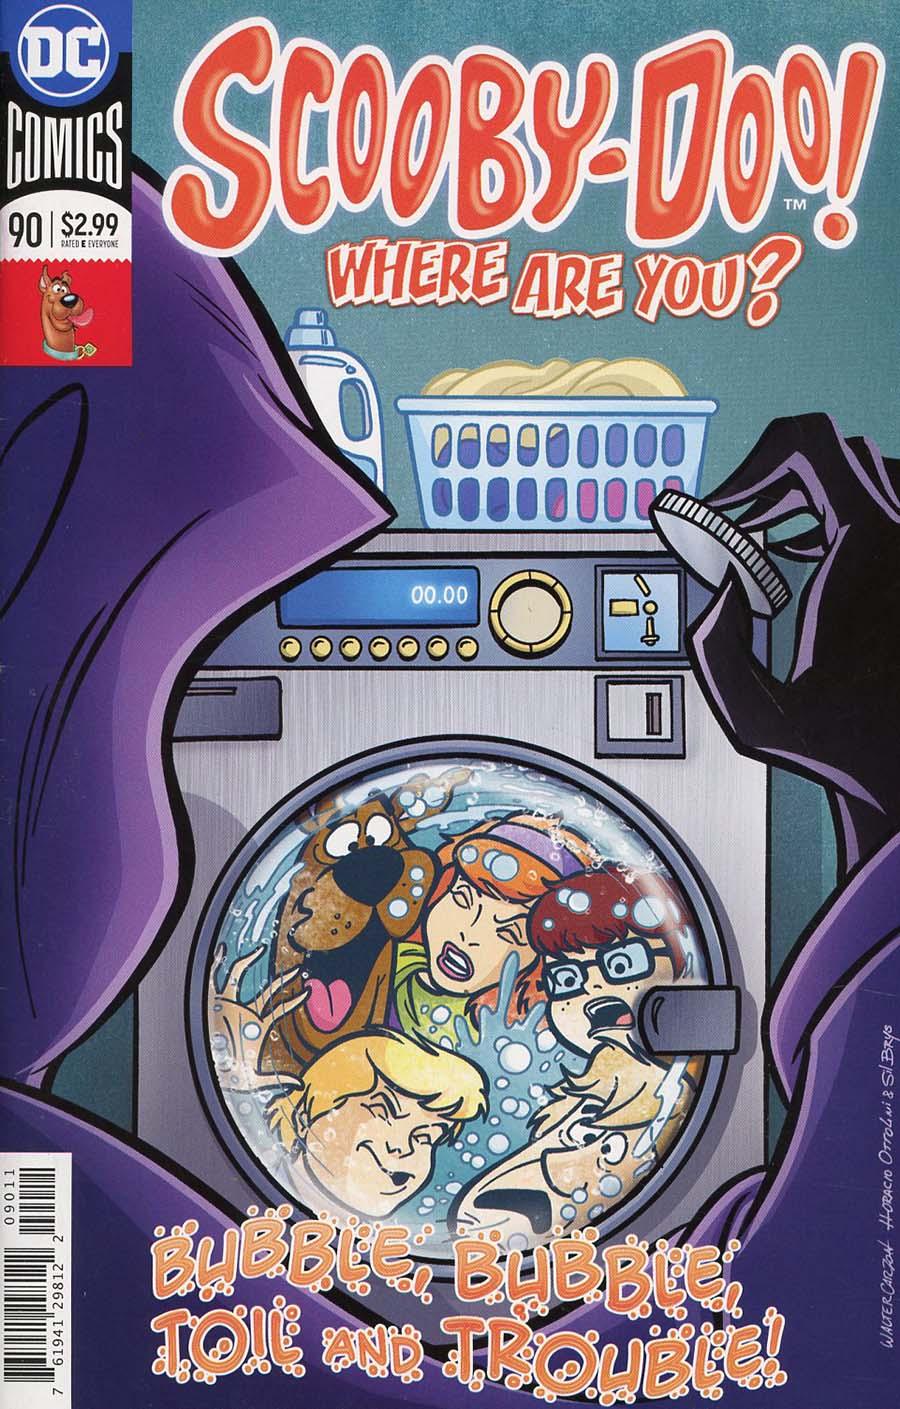 Scooby-Doo Where Are You Vol. 1 #90